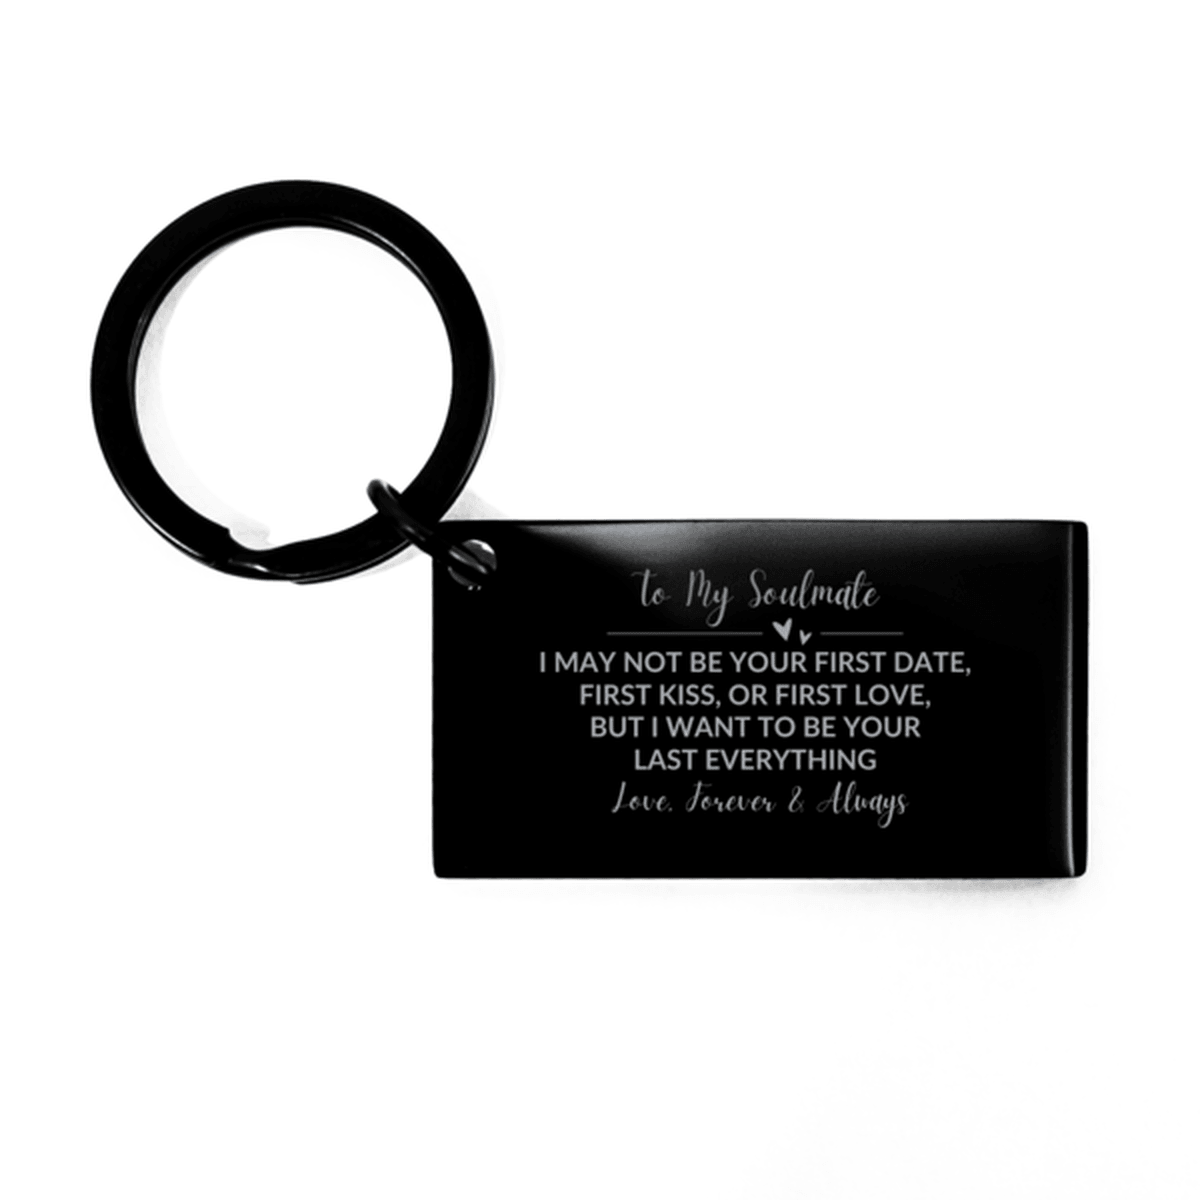 To My Soulmate I Want to Be Your Last Everything Black Engraved Keychain Romantic Valentine Gift - Mallard Moon Gift Shop